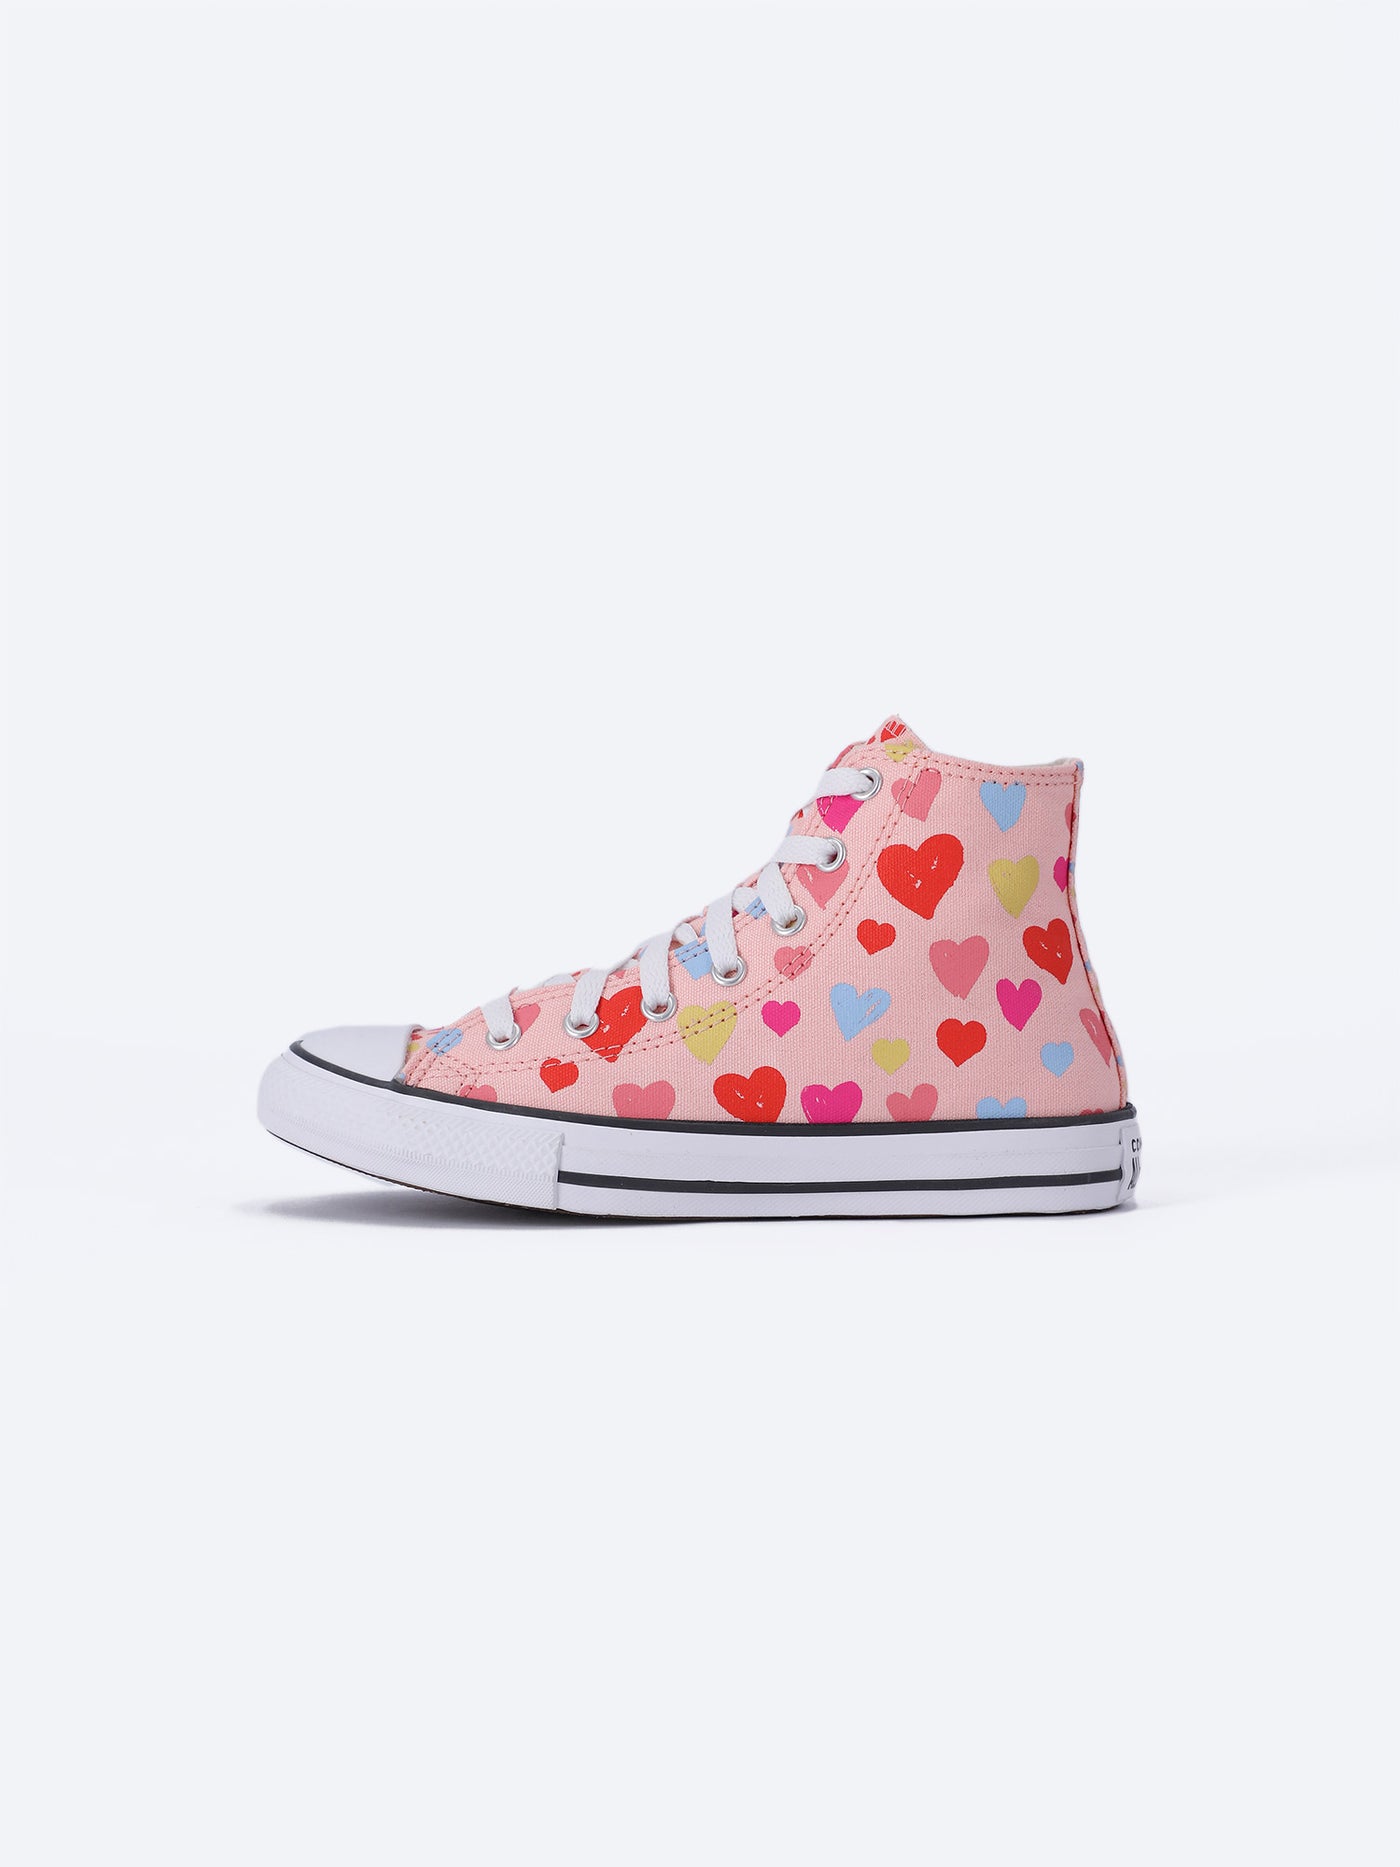 Converse Youth Girls Always On Hearts Sneaker Shoes